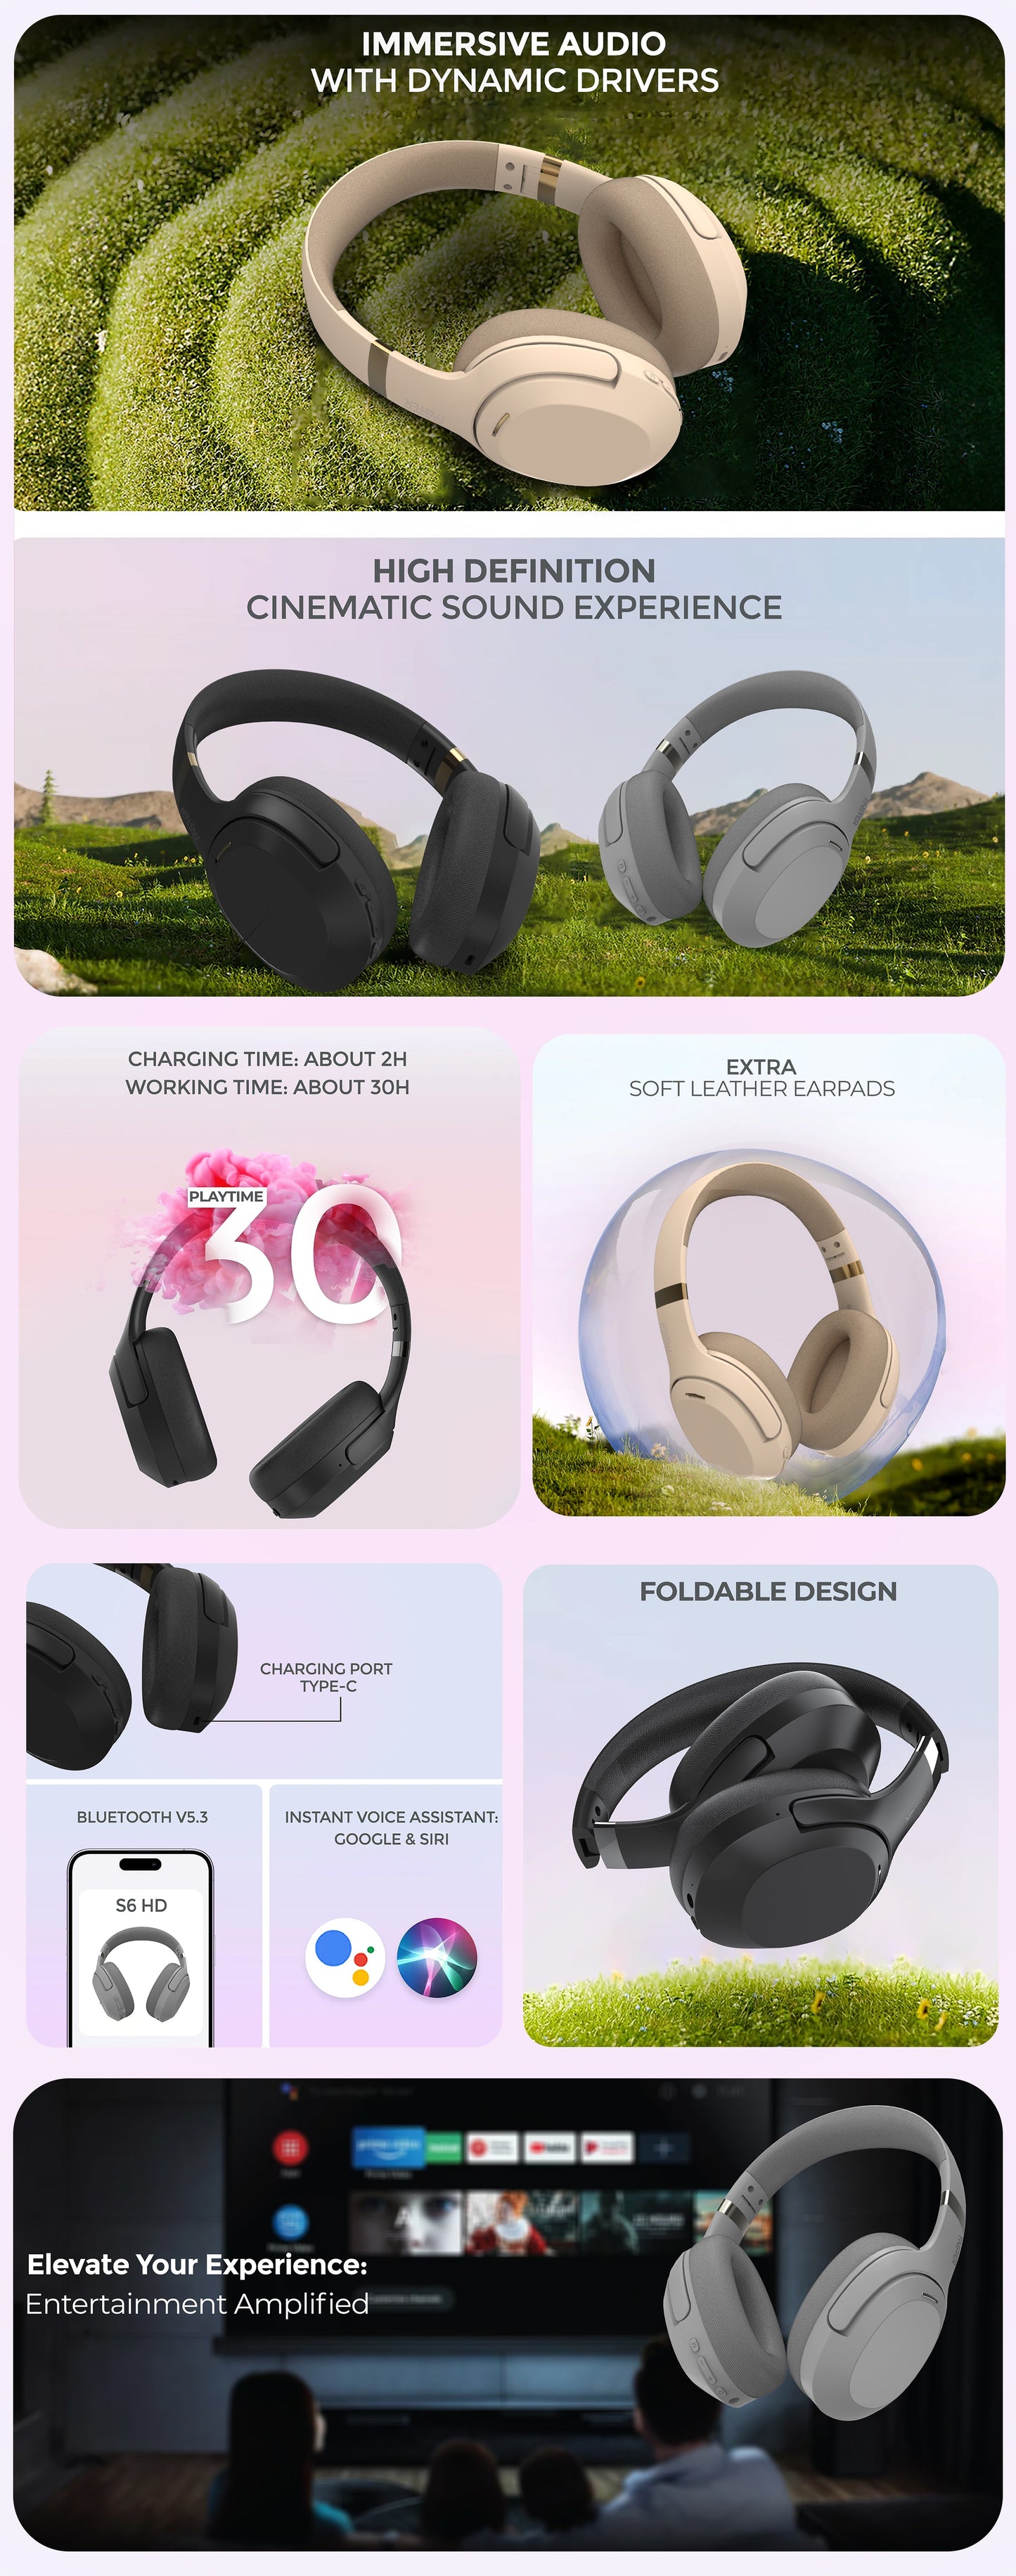 Wireless Freedom, High-Definition Sound: FASTER S6 HD Stereo Headphones